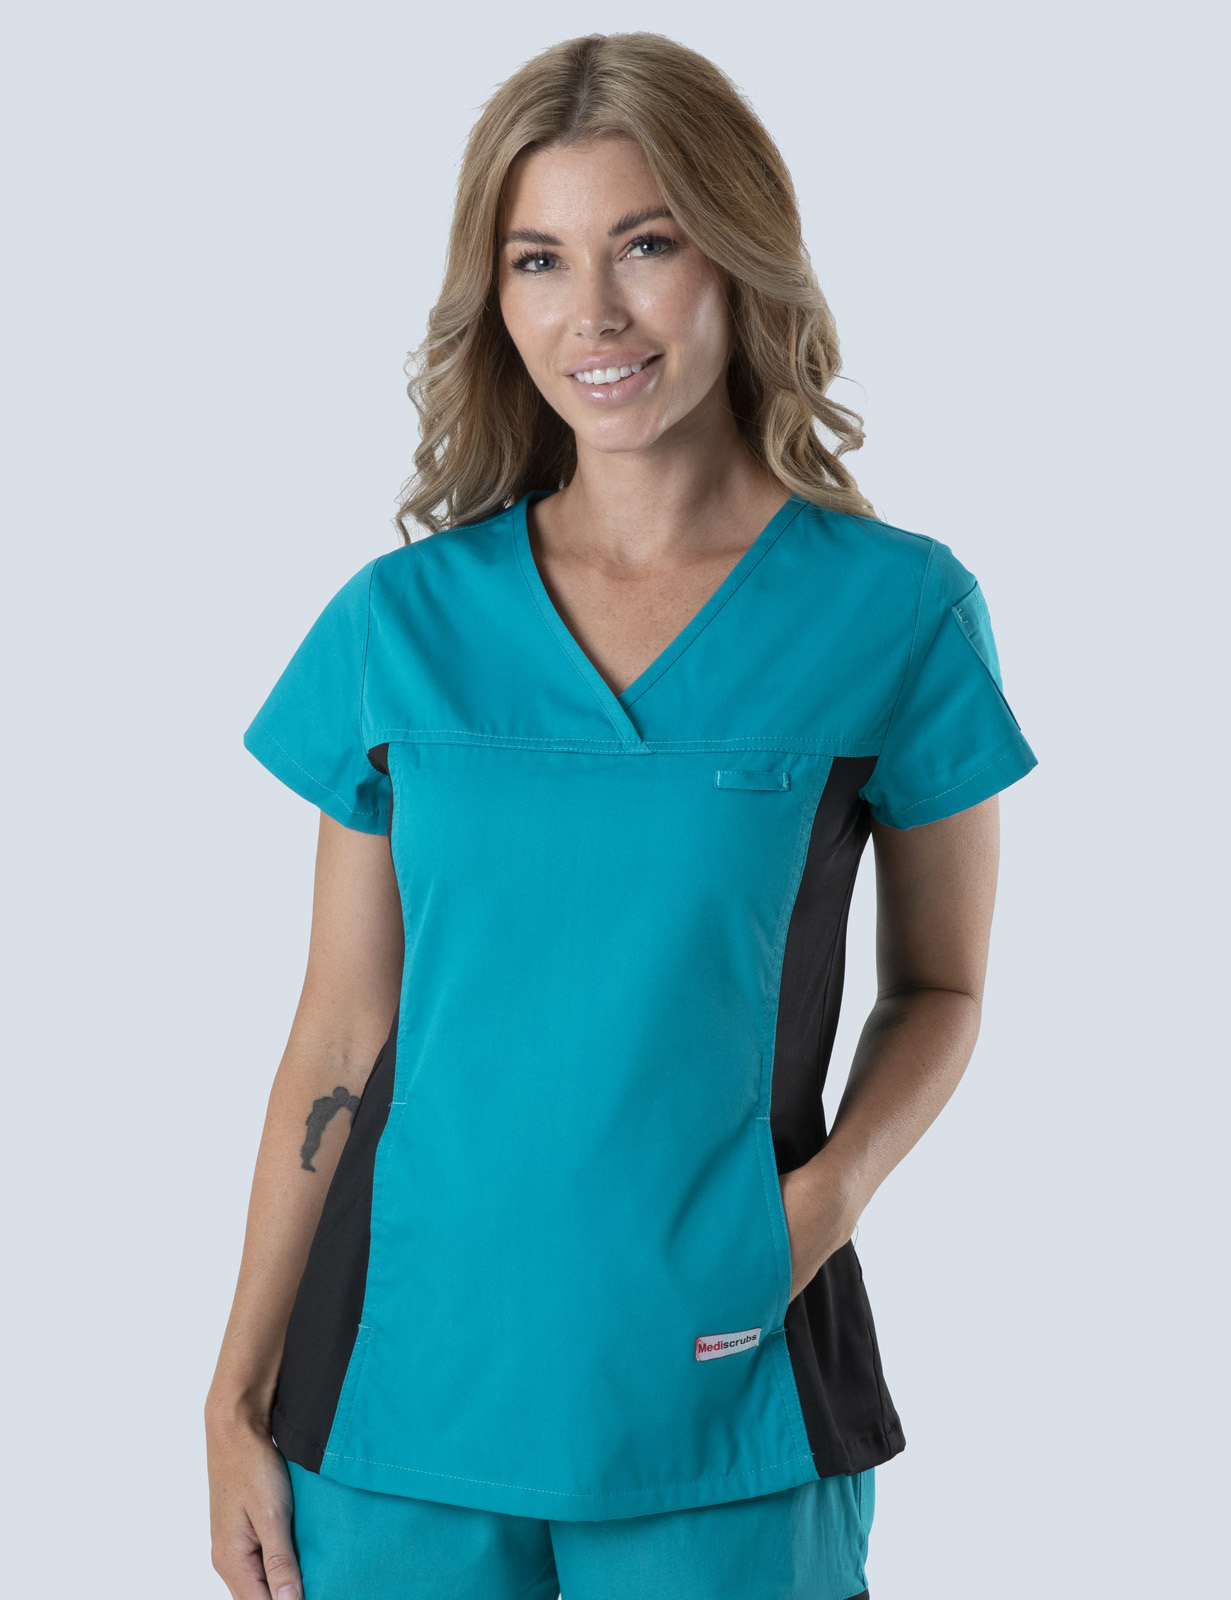 Pathology North - Coffs Harbour (Women's Fit Spandex Scrub Top in Teal incl Logos)